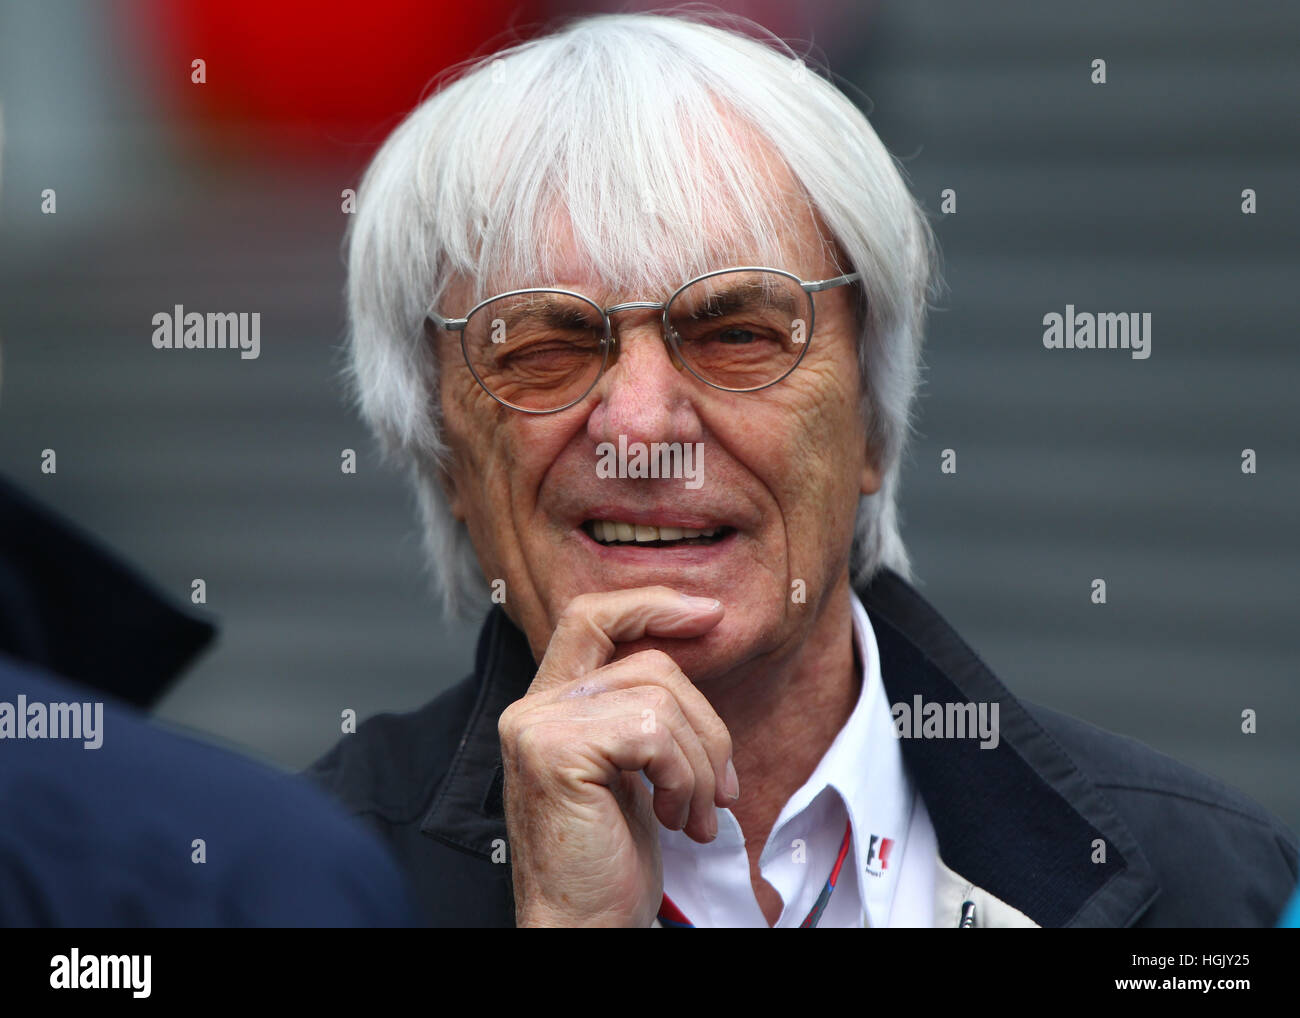 Formula One chief executive Bernie Ecclestone seen at the paddock prior to the third practice session at the F1 race track of Nuerburgring, Nuerburg, Germany, 23 July 2011. The Formula One Grand Prix of Germany will take place on 24 July. Photo: Jens Büttner dpa/lrs | usage worldwide Stock Photo